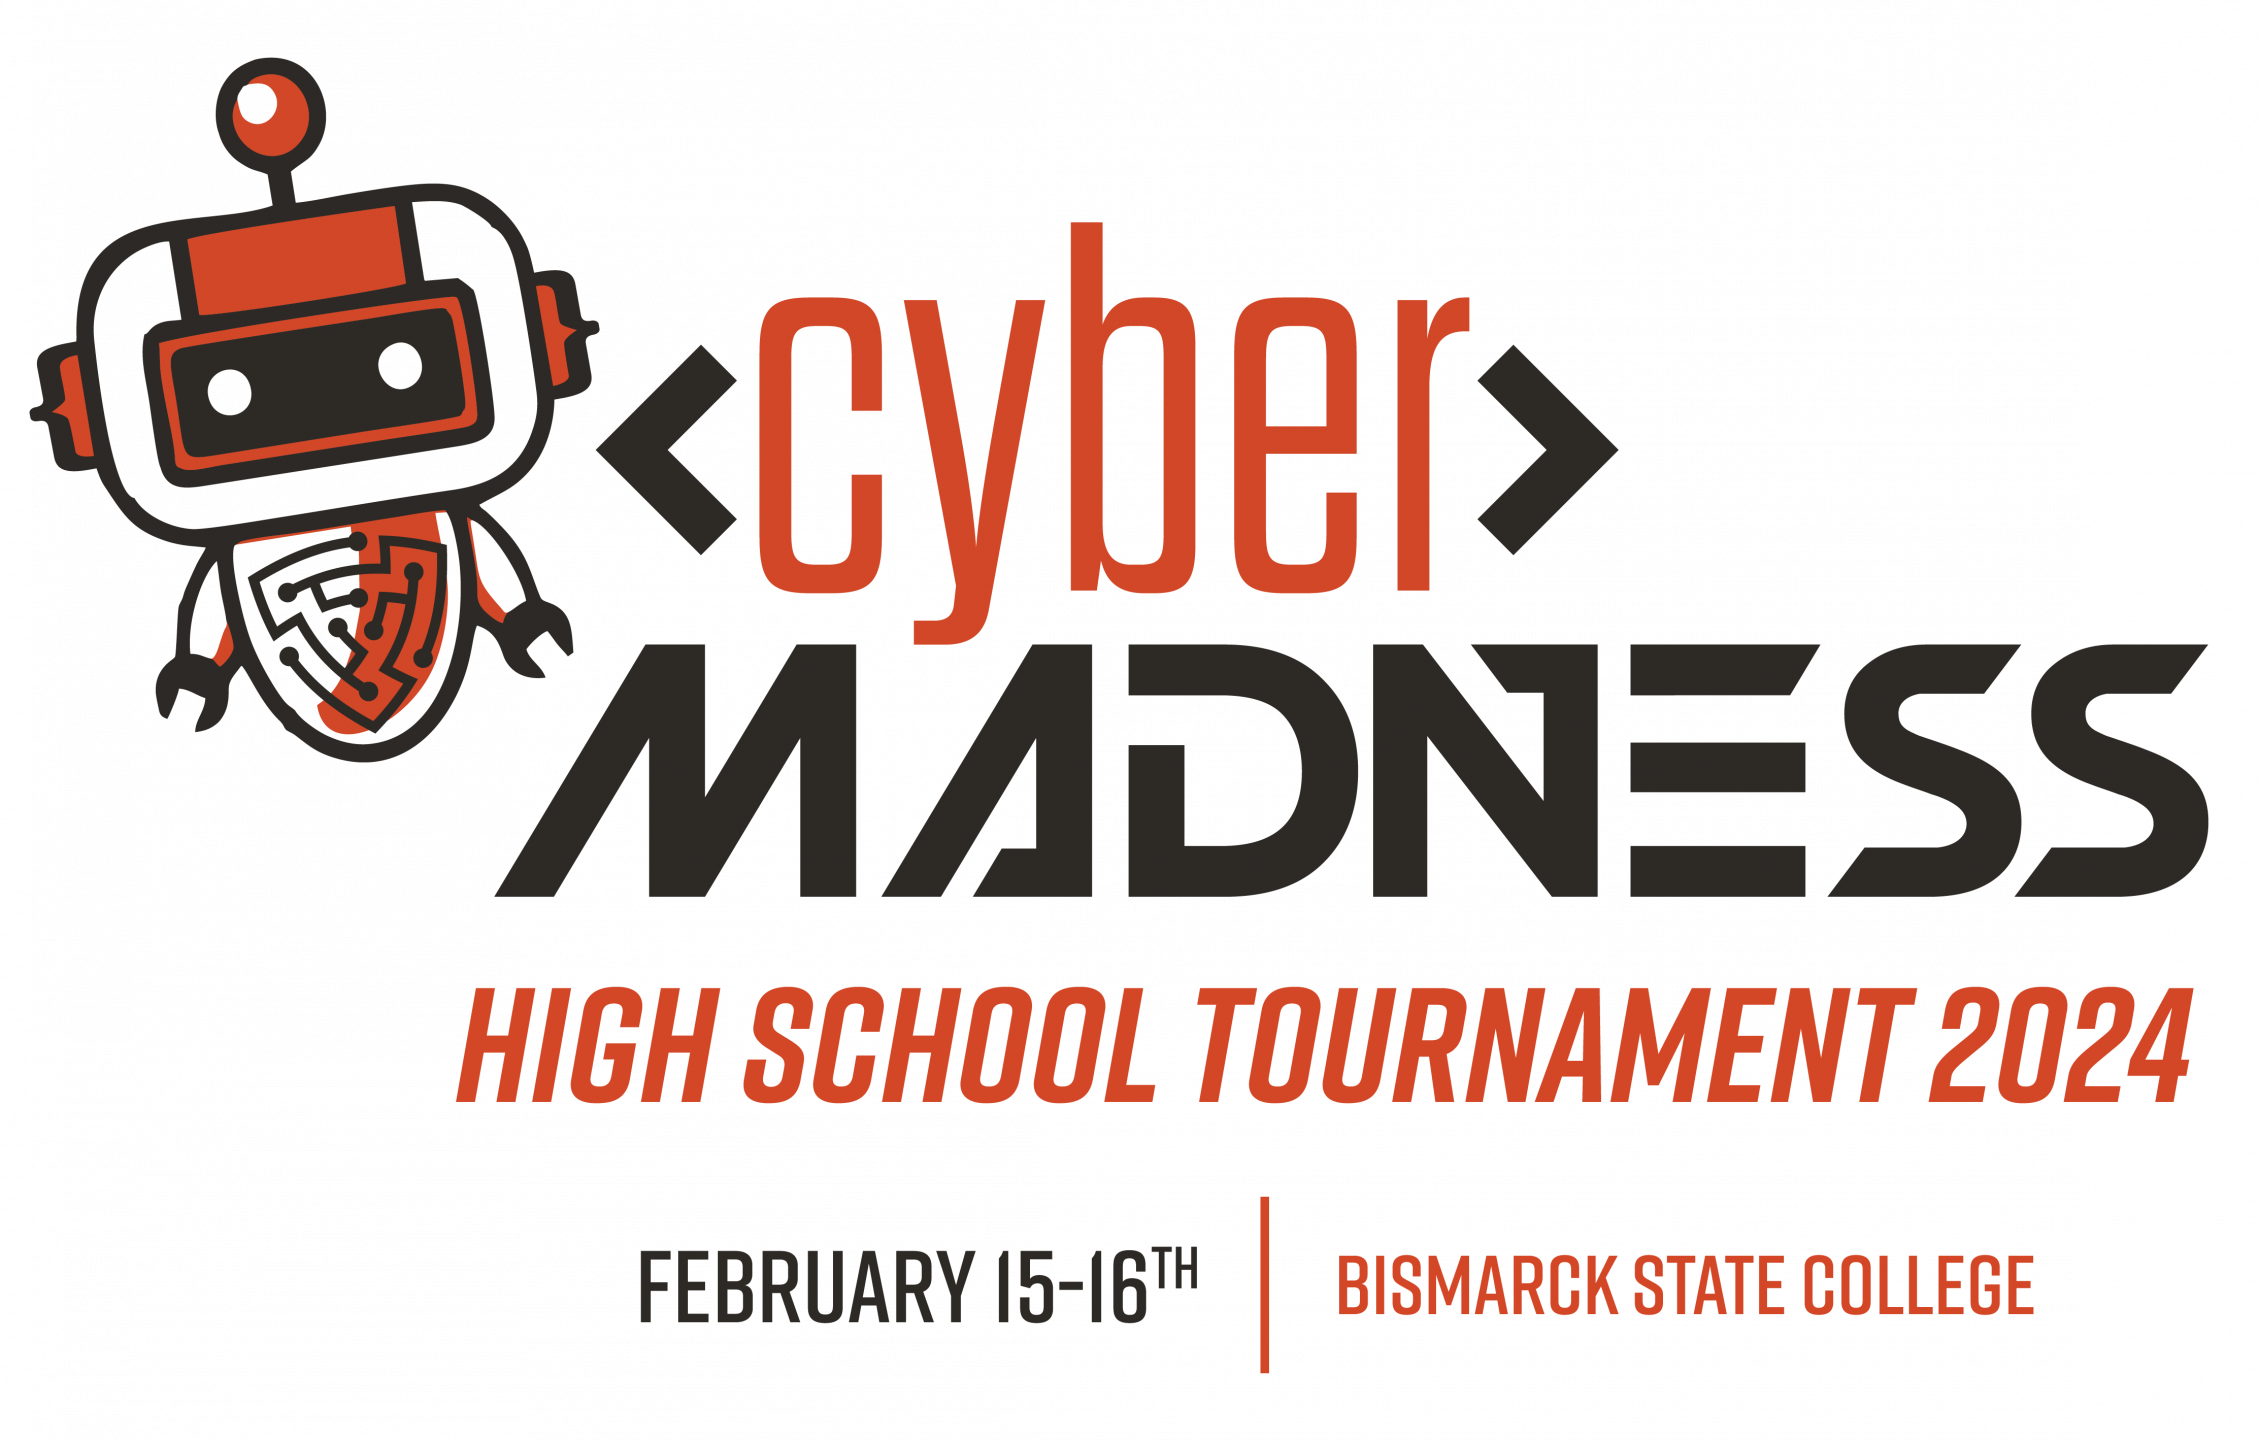 Cyber Madness High School Tournament 2024 February 15-16th at Bismarck State College